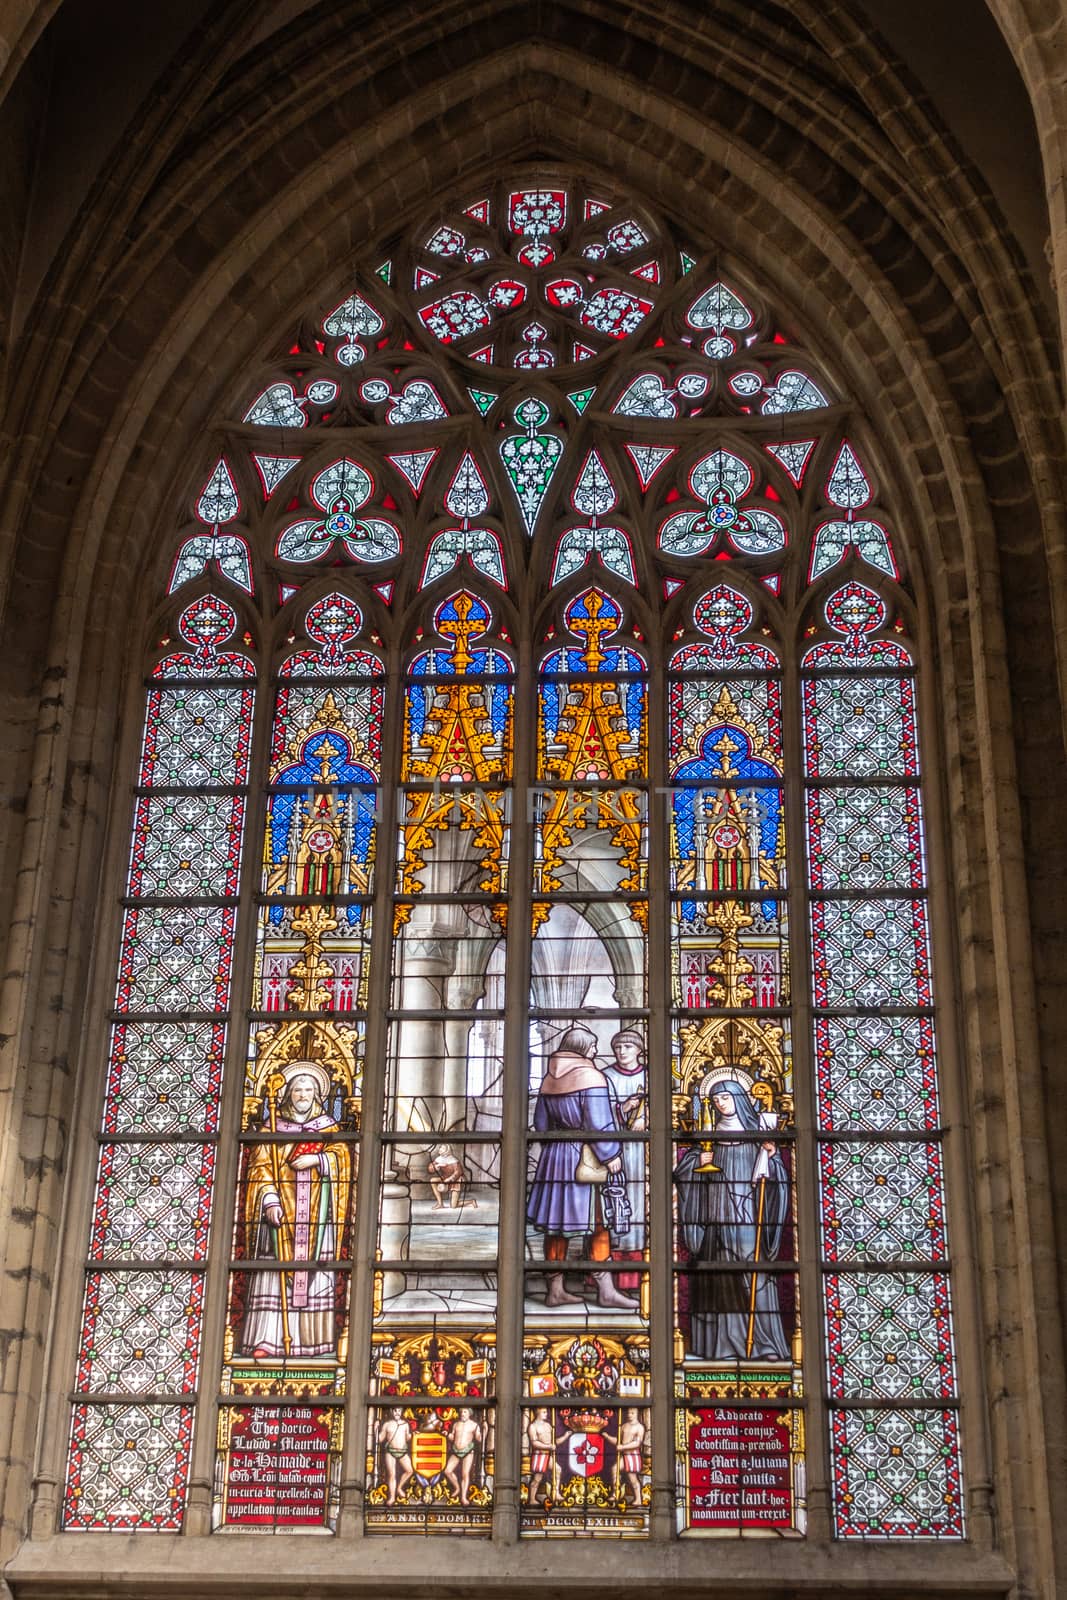 Brussels, Belgium - September 26, 2018: Stained Glass Window of Cathedral of Saint Michael and Saint Gudula.